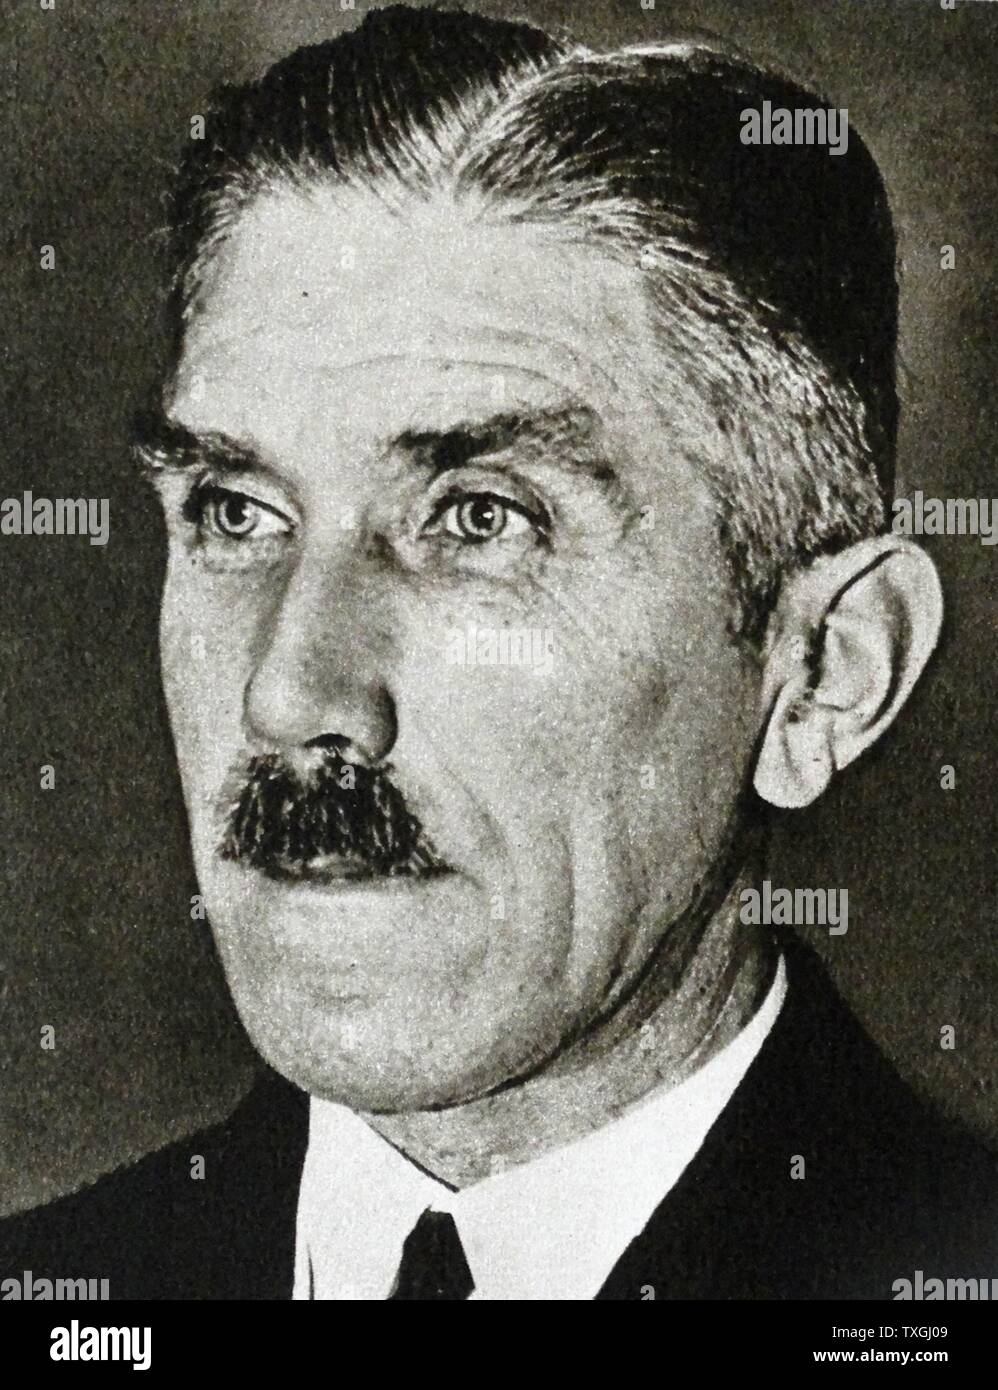 Franz von Papen 1879 ñ 1969. German nobleman, General Staff officer and politician. He served as Chancellor of Germany in 1932 and as Vice-Chancellor under Adolf Hitler in 1933ñ1934. Stock Photo